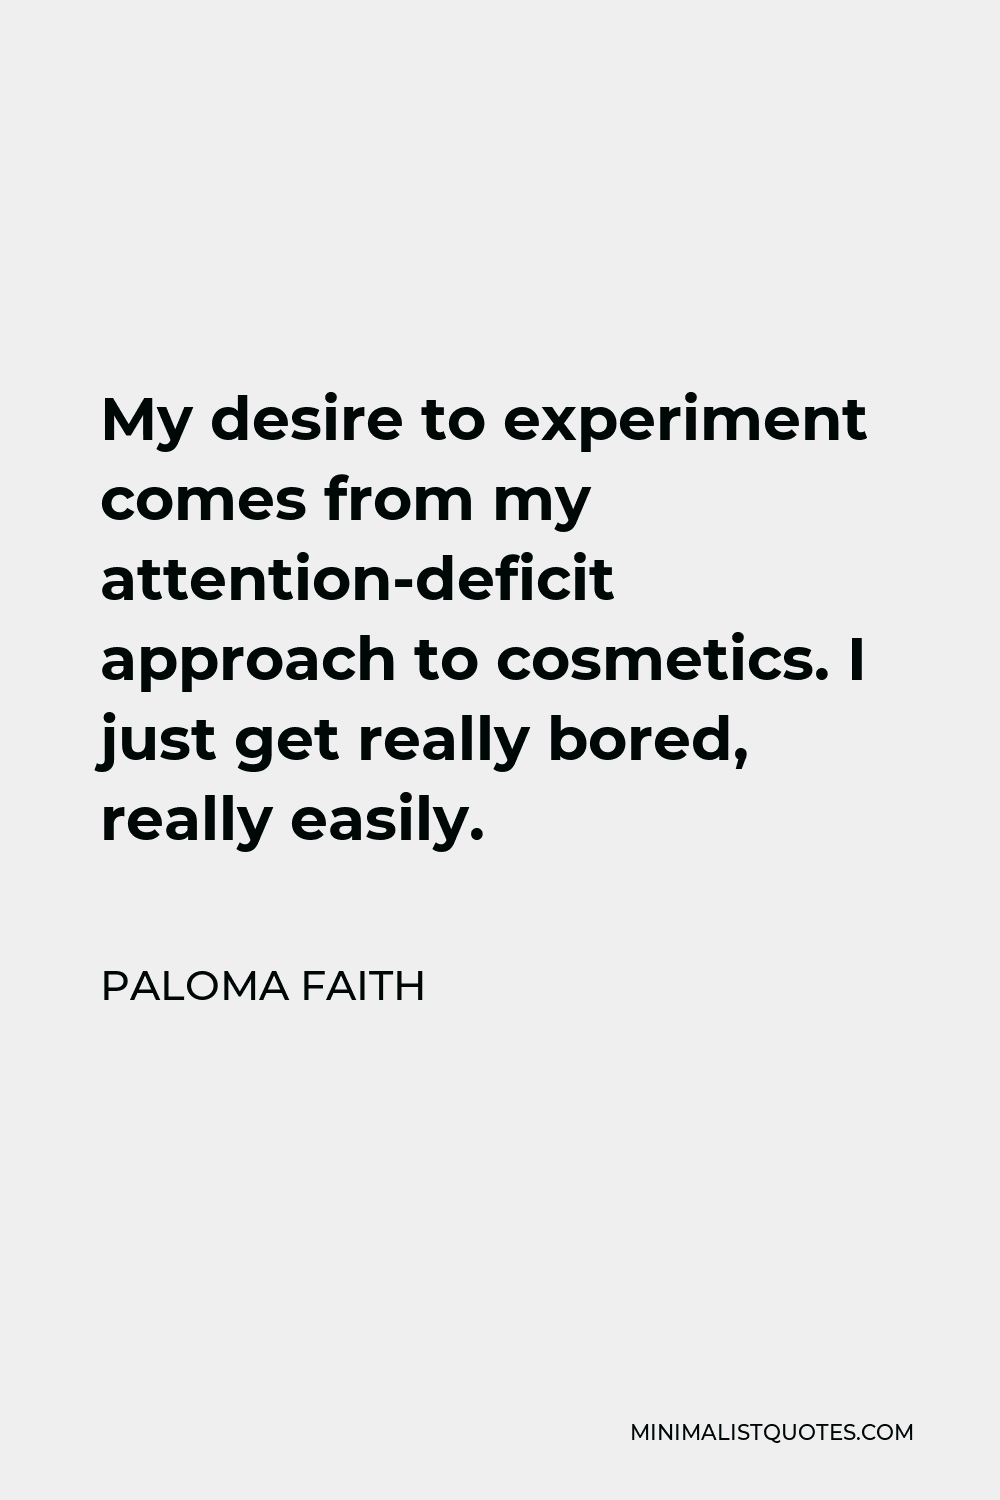 Paloma Faith Quote - My desire to experiment comes from my attention-deficit approach to cosmetics. I just get really bored, really easily.